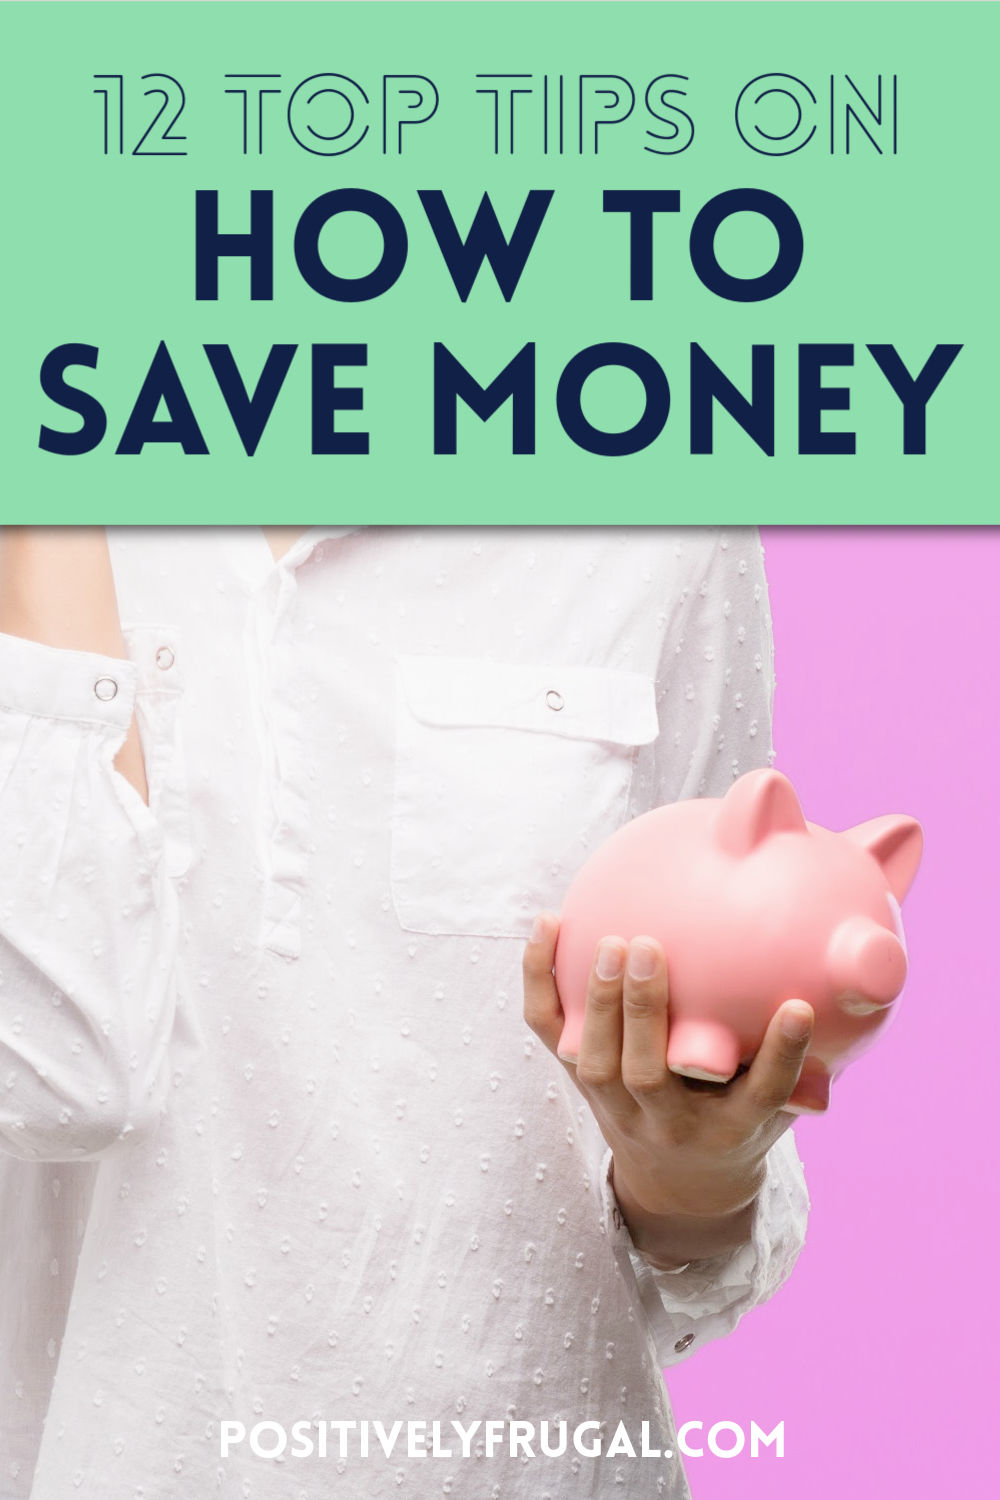 Top Tips on How To Save Money by PositivelyFrugal.com